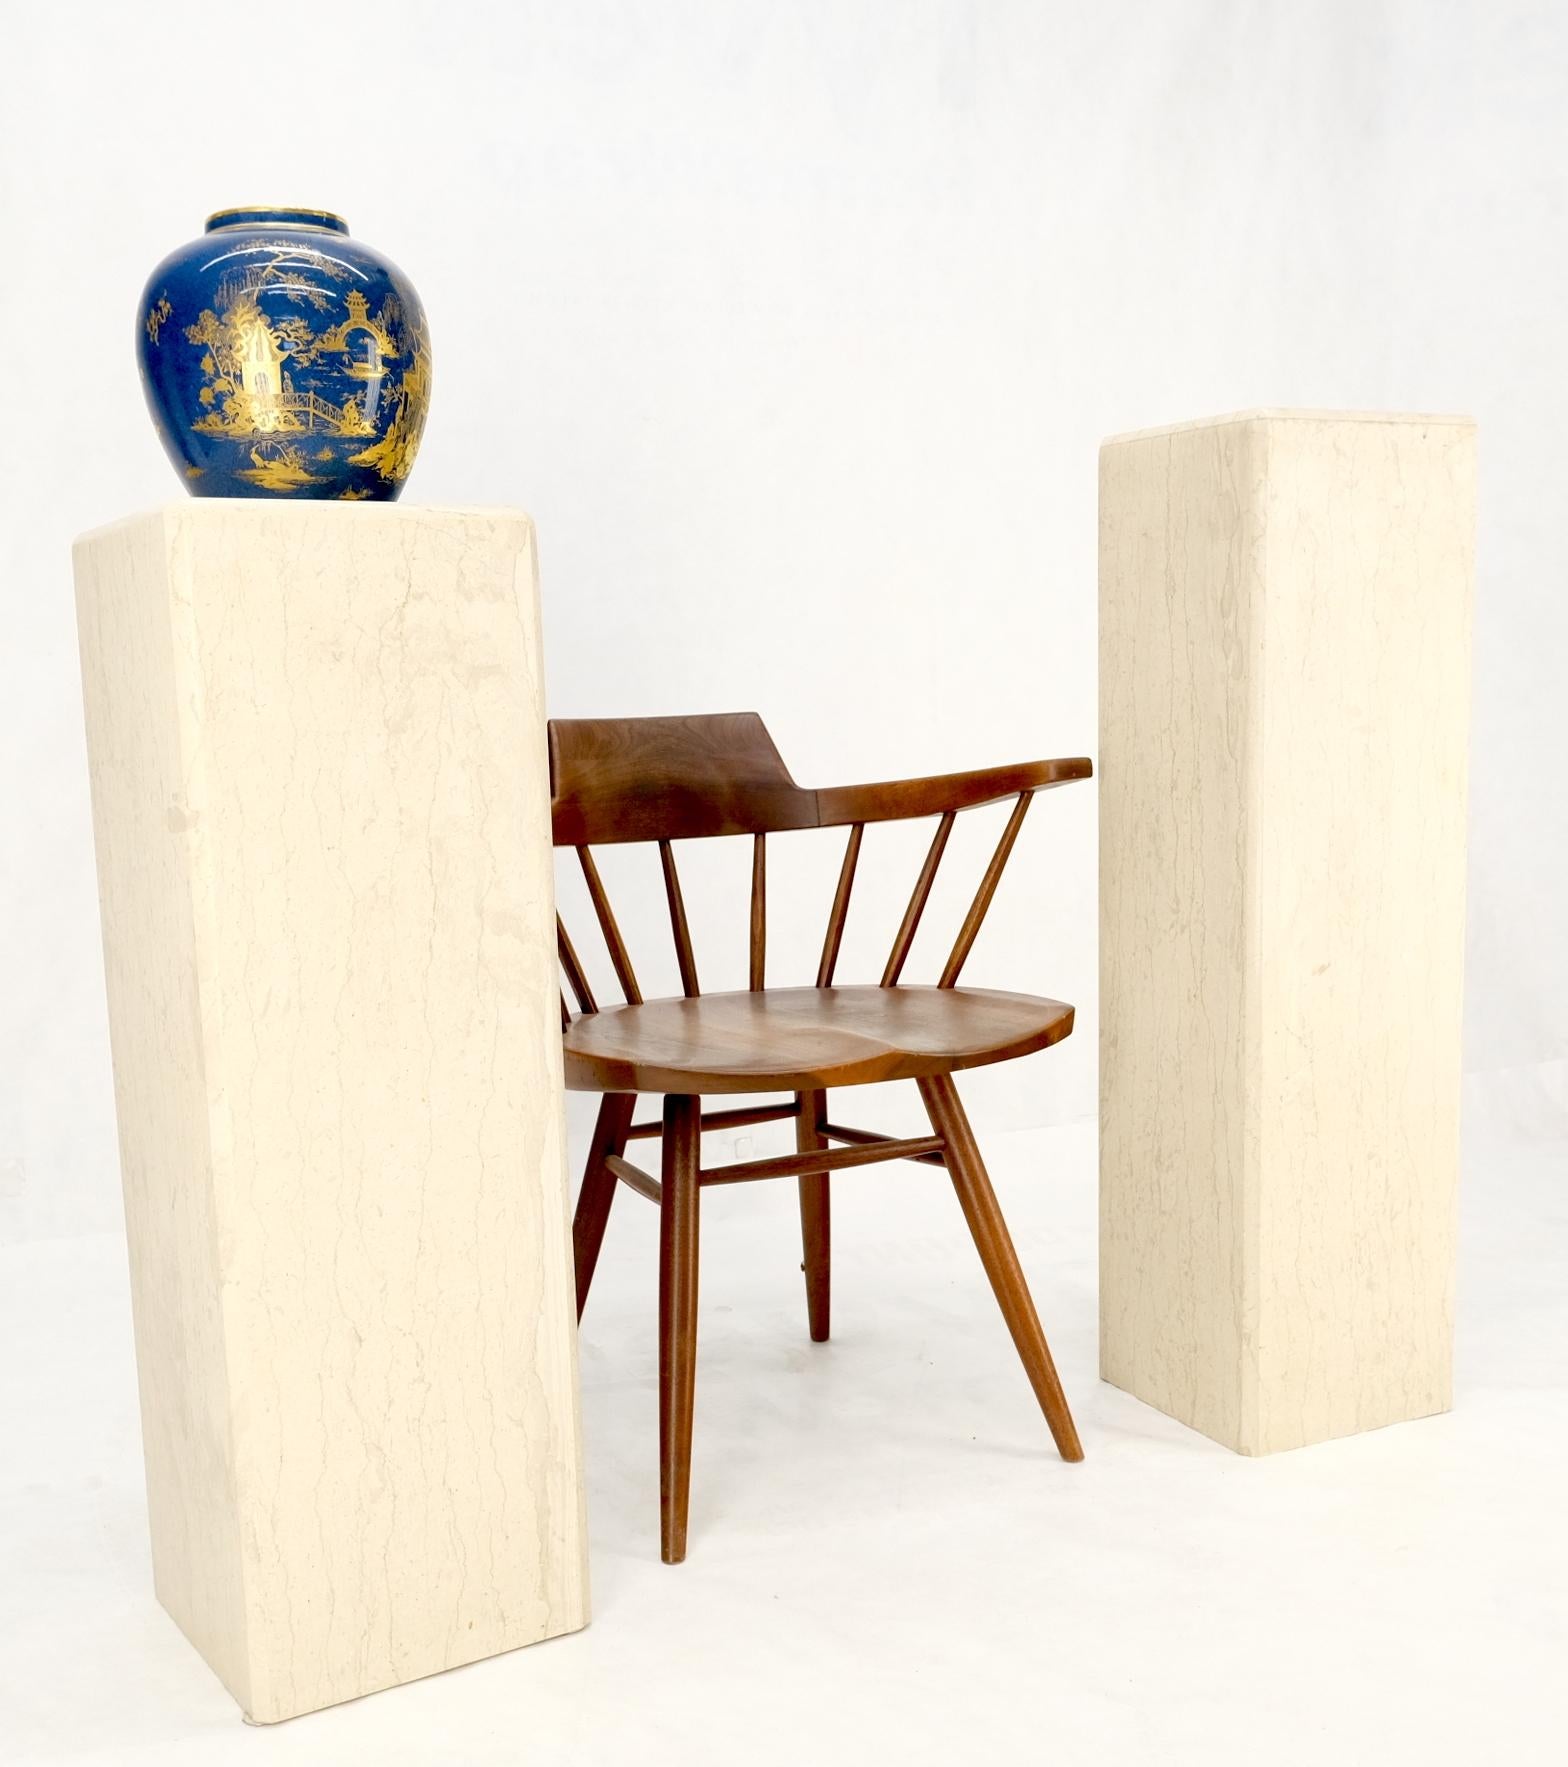 Two pedestals one measures 11